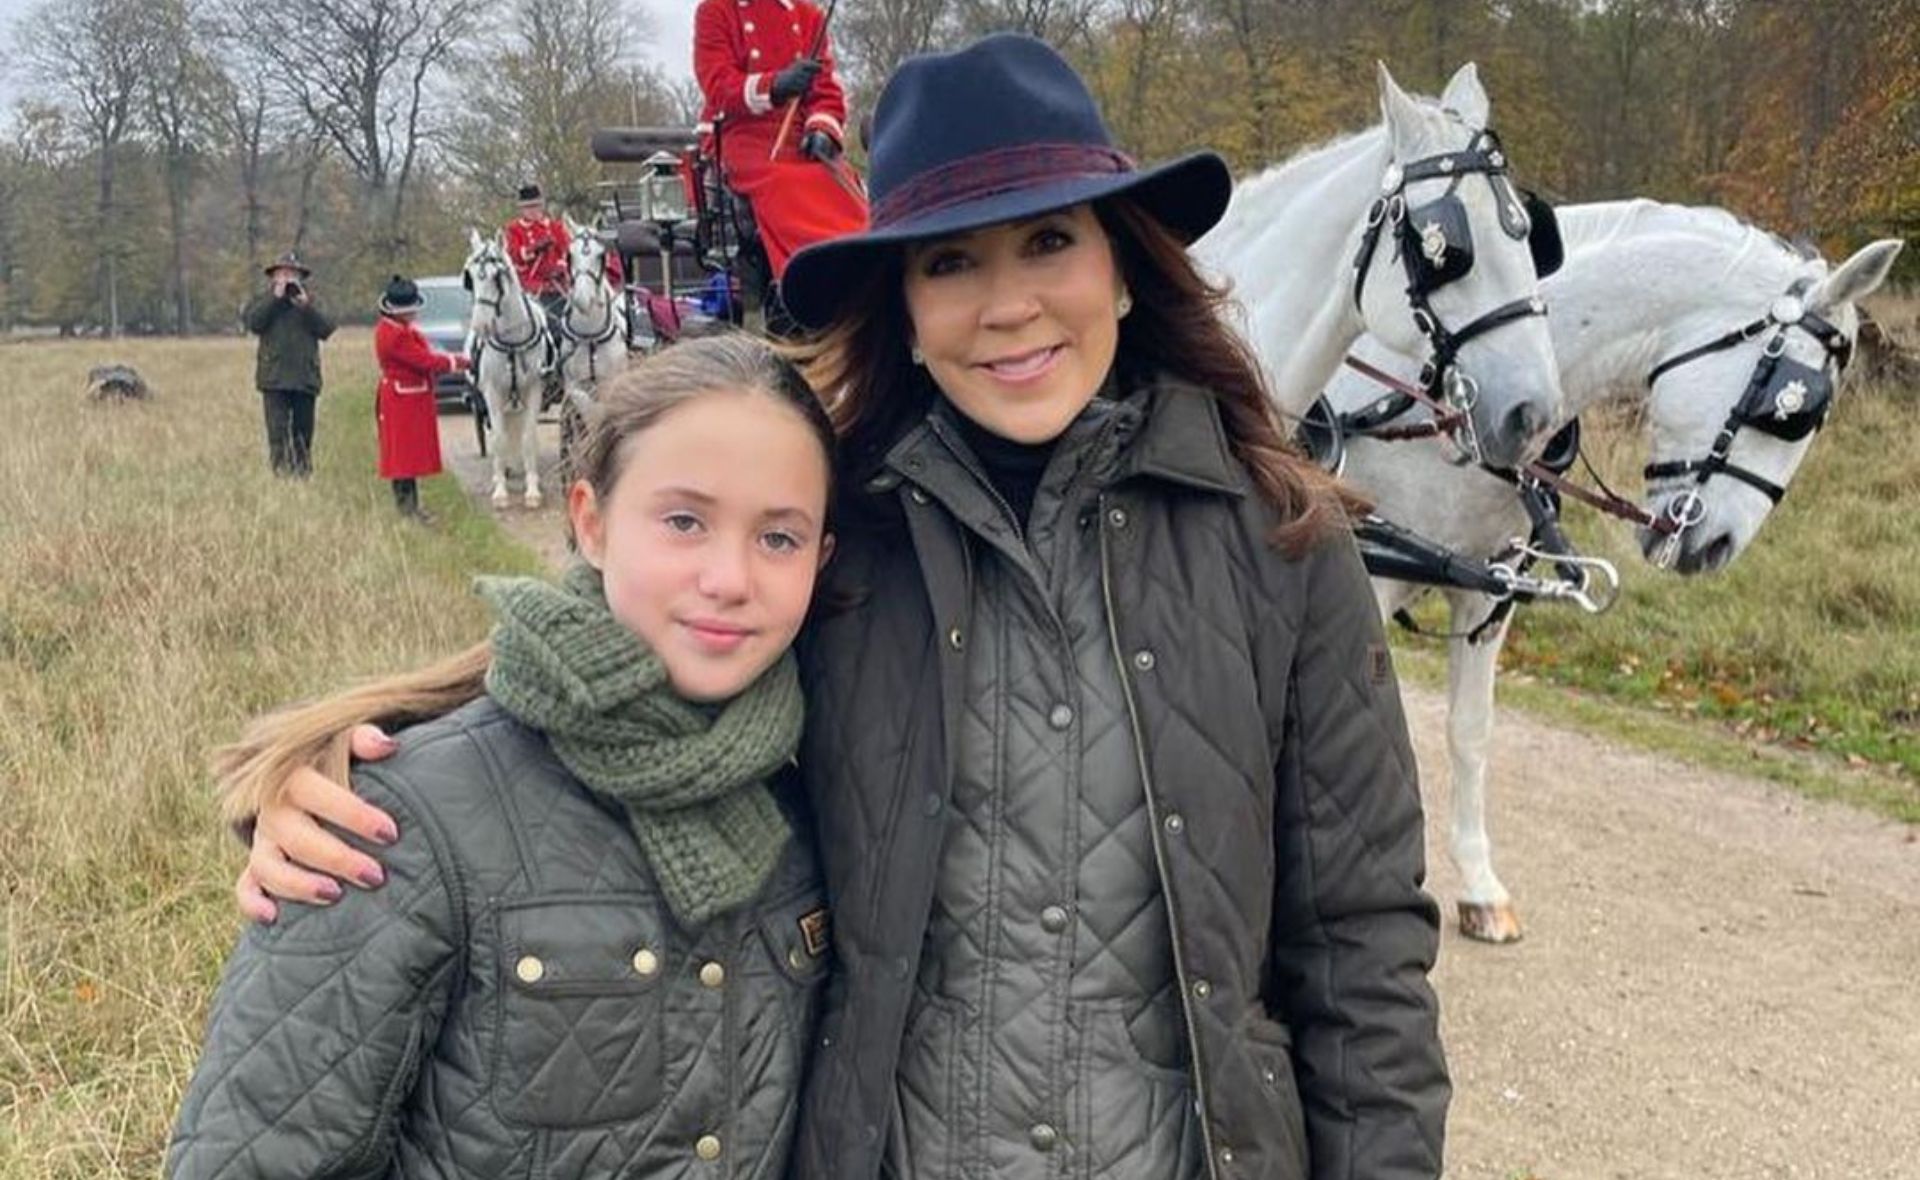 Princess Mary’s daughter Josephine looks just like her mum as the duo step out for special event